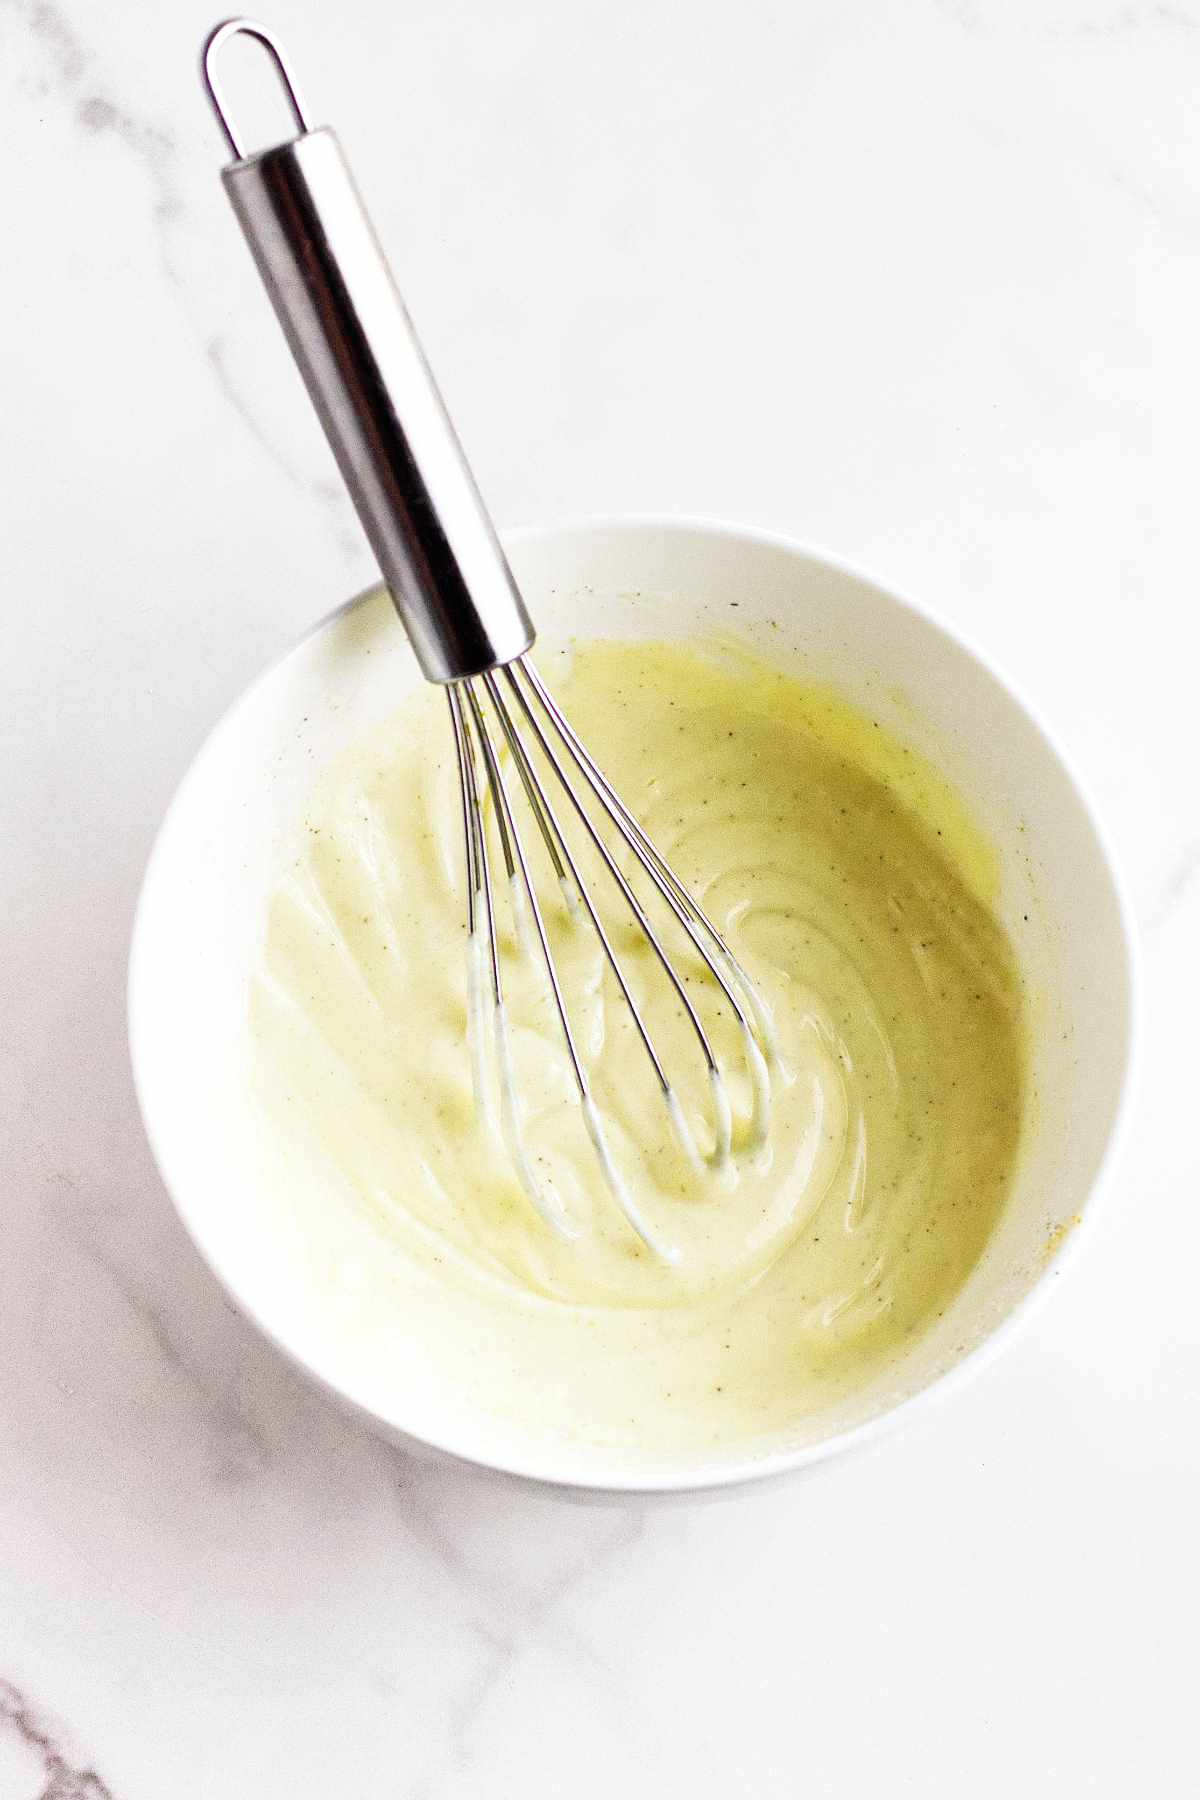 whisk in a bowl of blended white sauce.